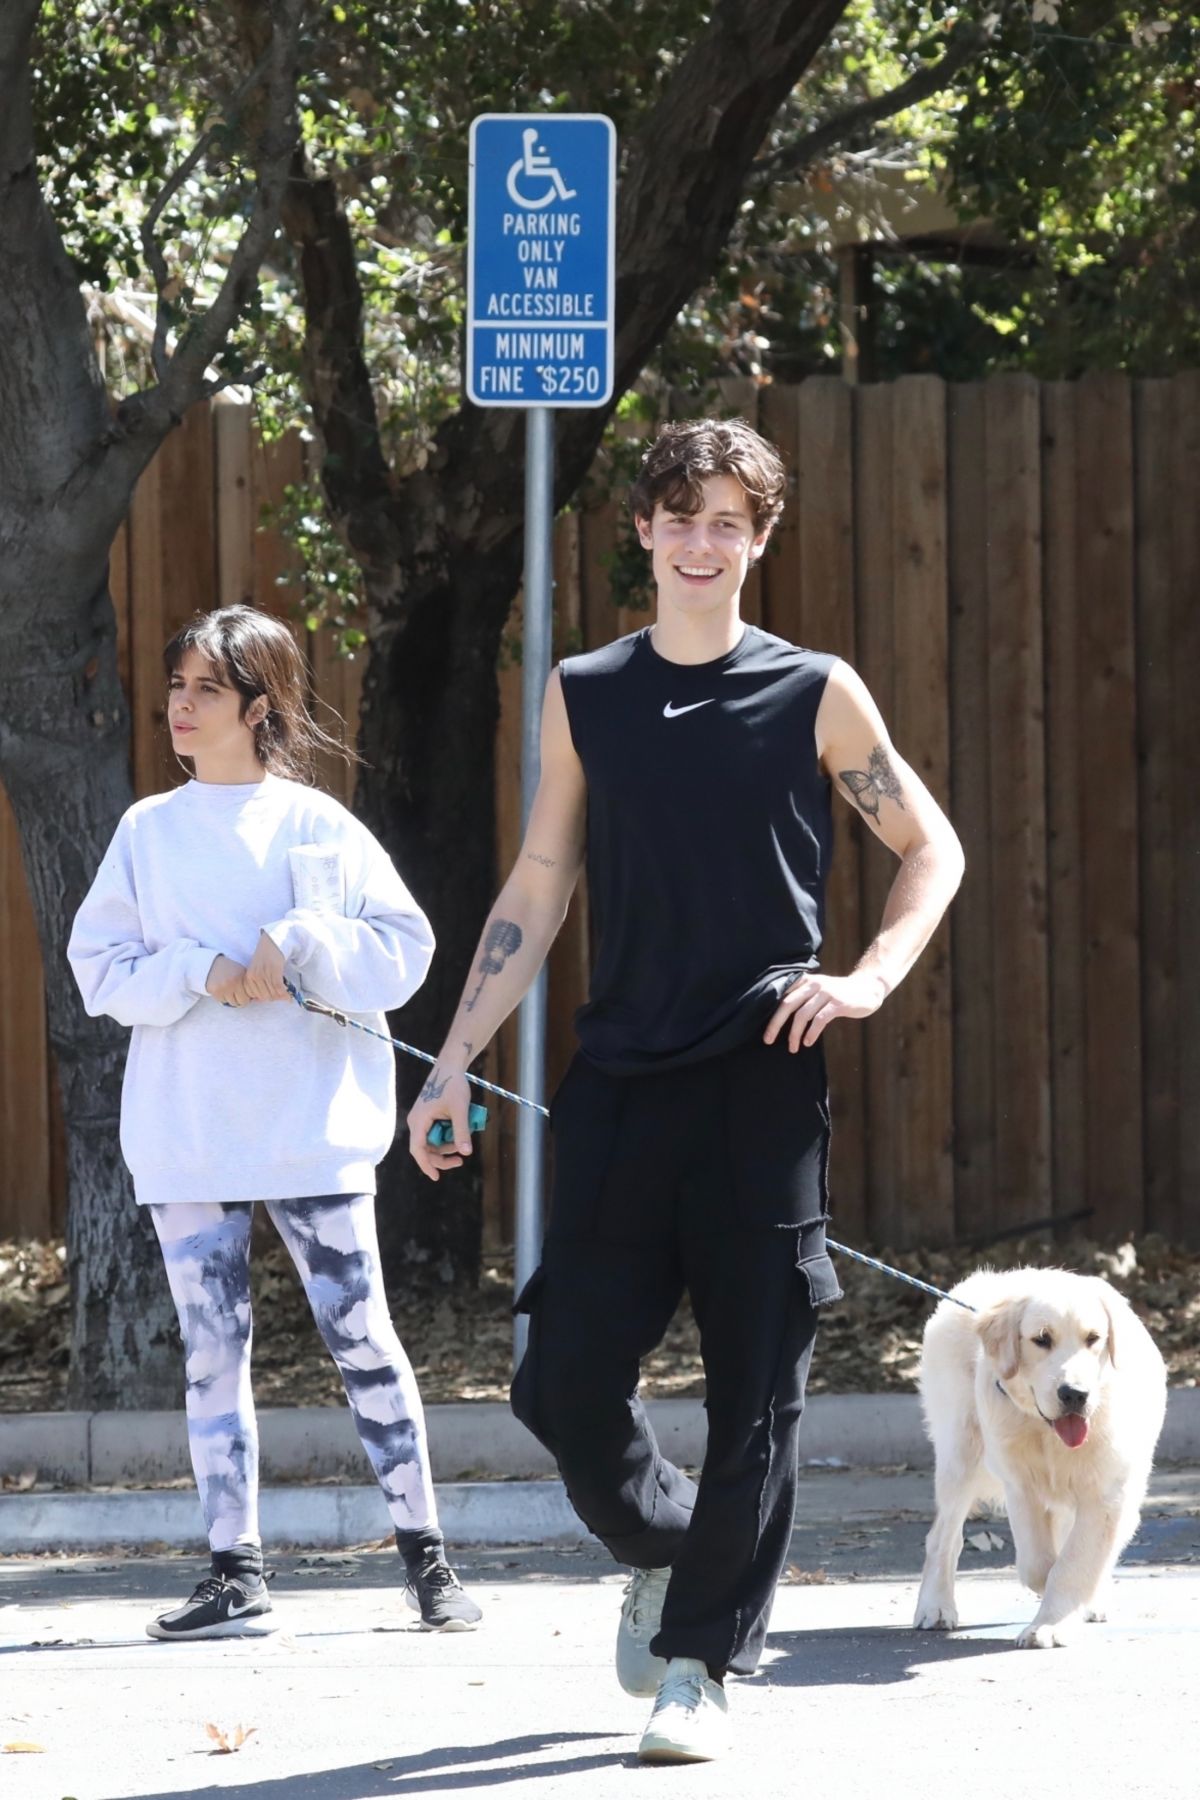 camila-cabello-and-shawn-mendes-out-with-their-dog-in-los-angeles-03-19-2021-6.jpg